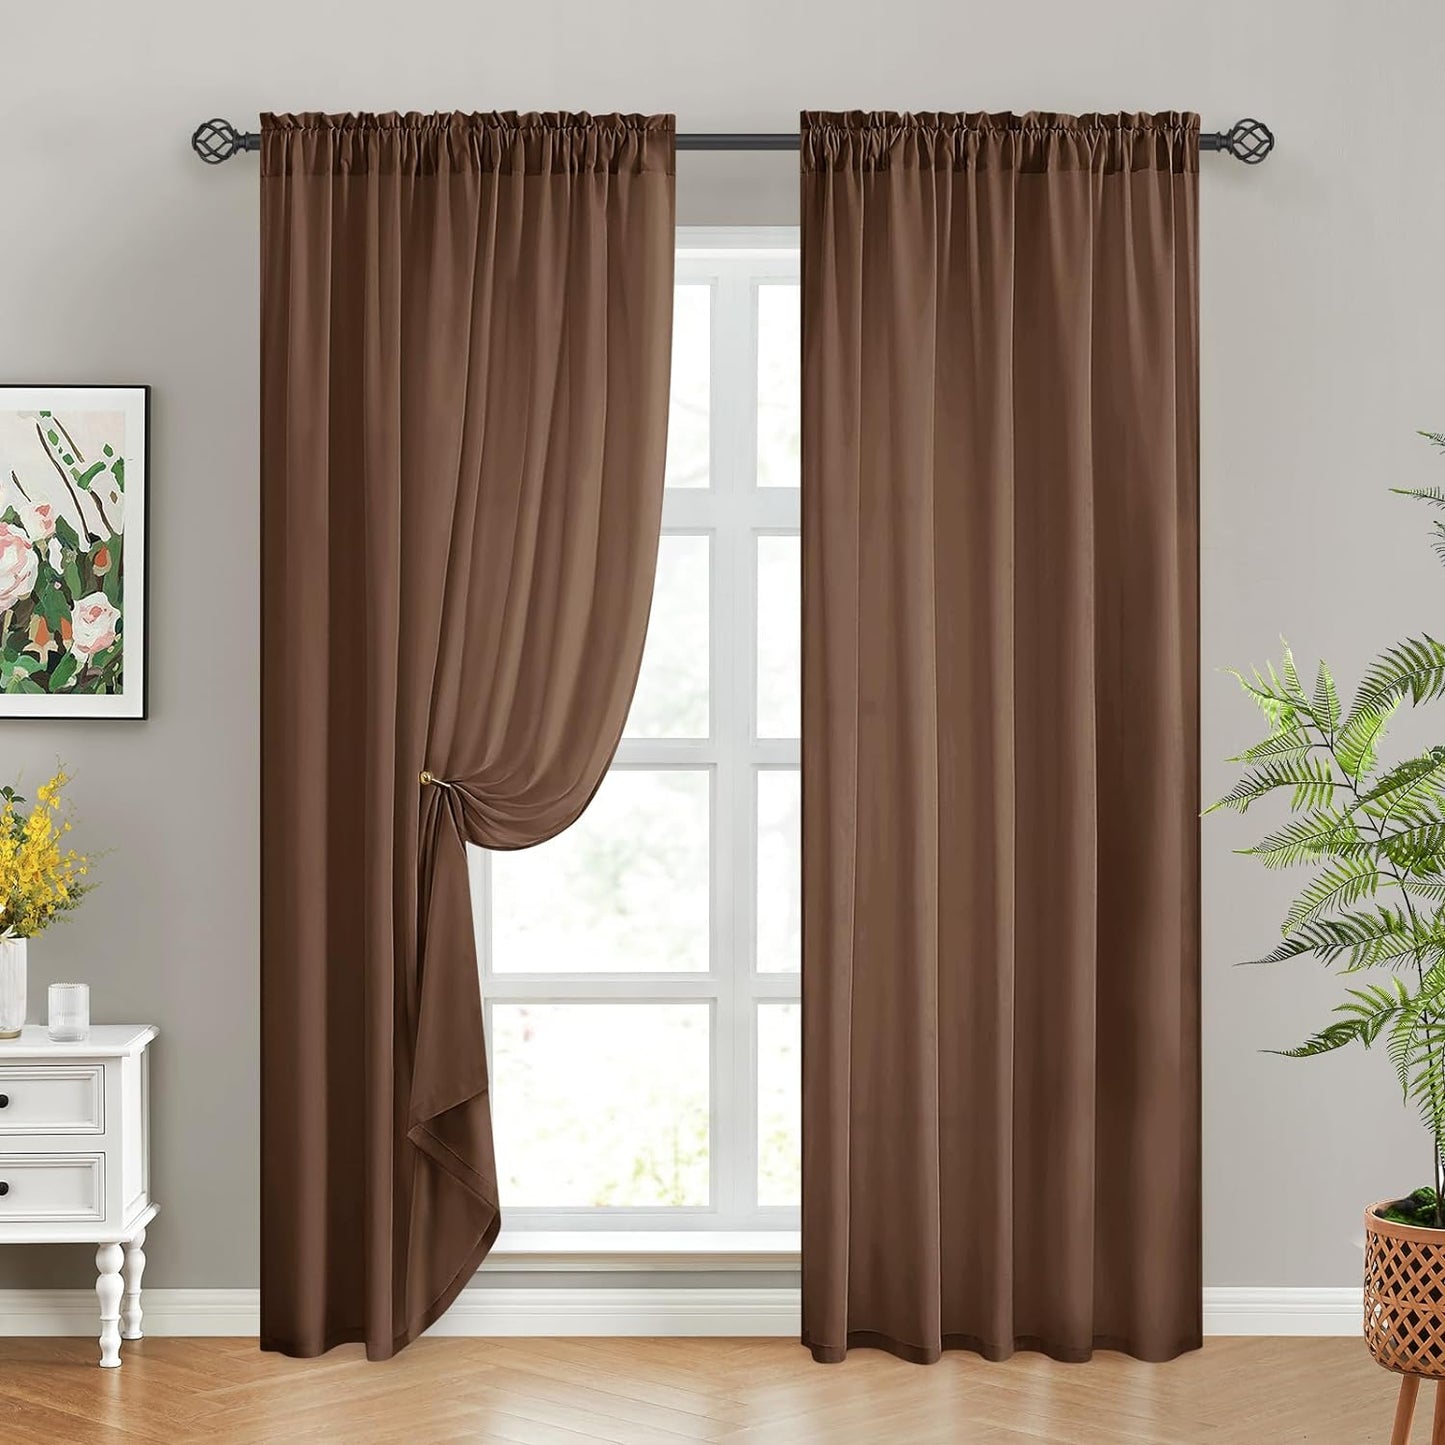 HOMEIDEAS Non-See-Through White Privacy Sheer Curtains 52 X 84 Inches Long 2 Panels Semi Sheer Curtains Light Filtering Window Curtains Drapes for Bedroom Living Room  HOMEIDEAS Brown W52" X L96" 